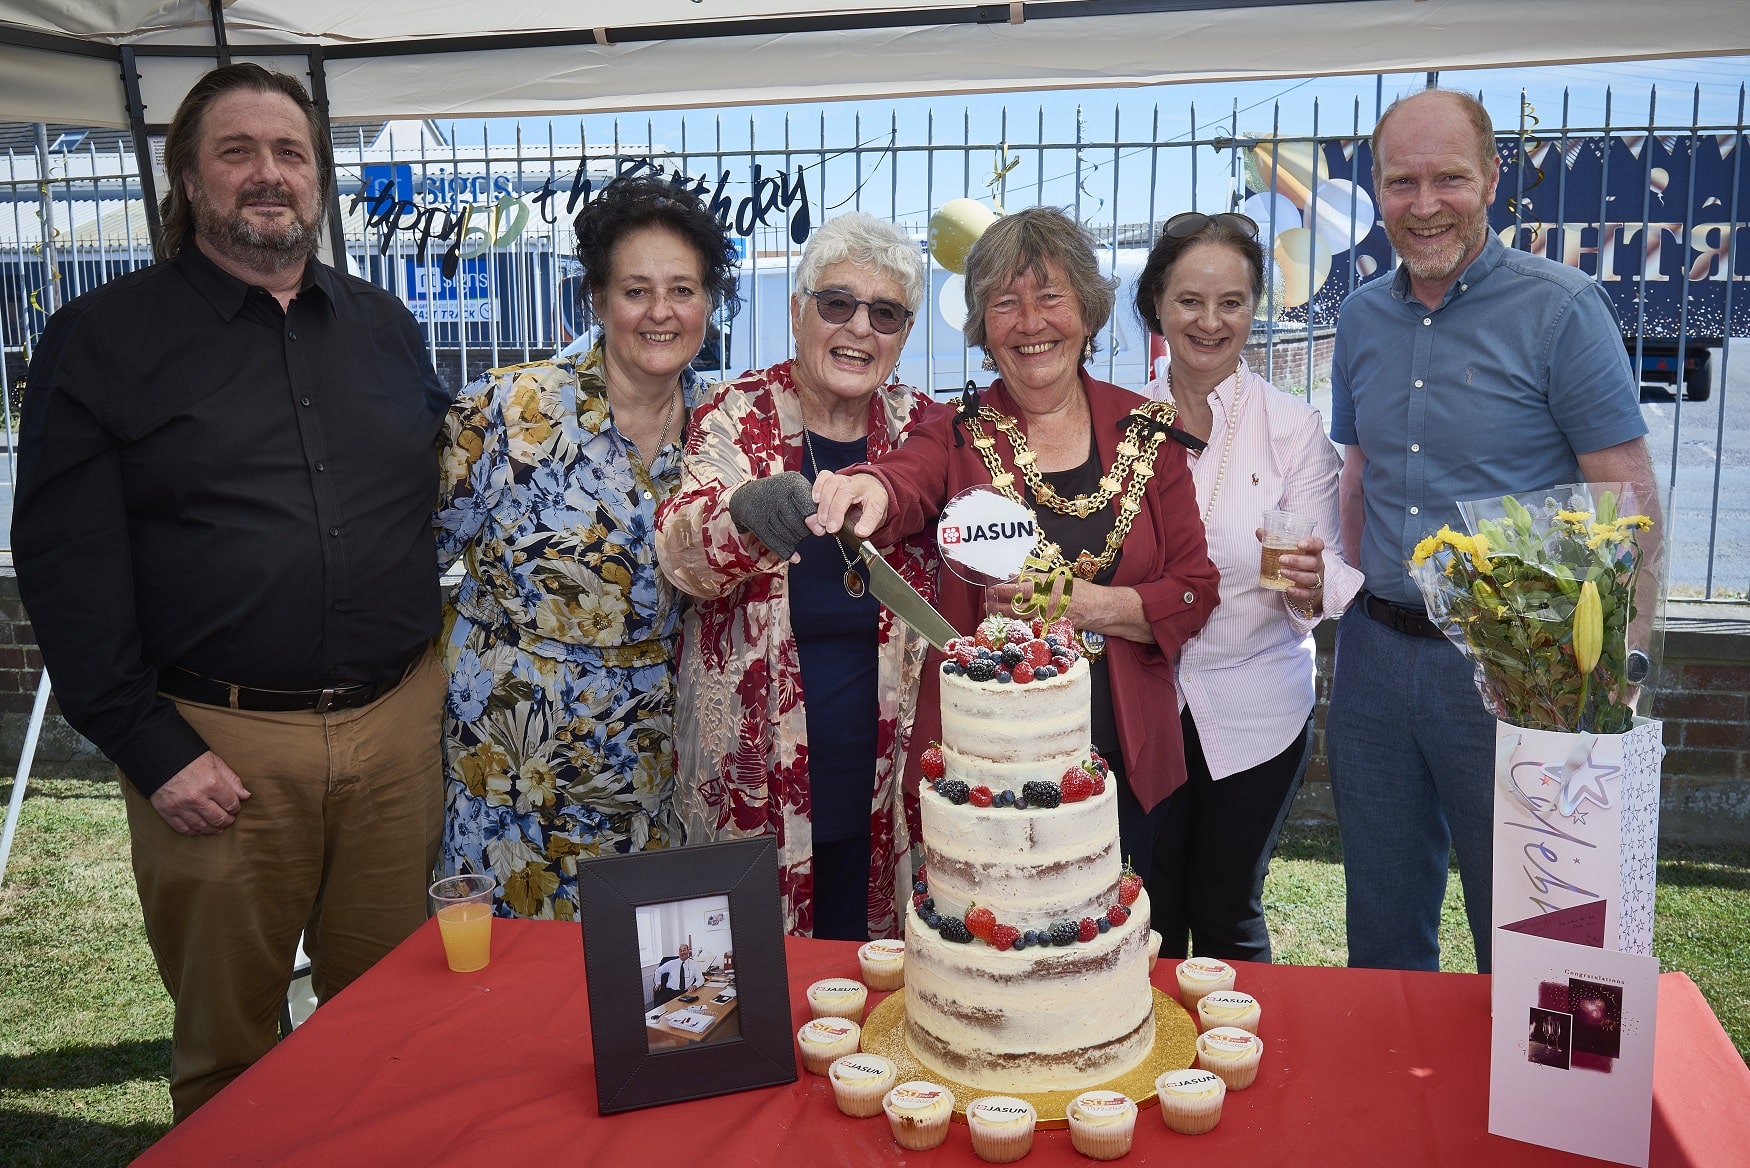 We’ve celebrated our 50th anniversary